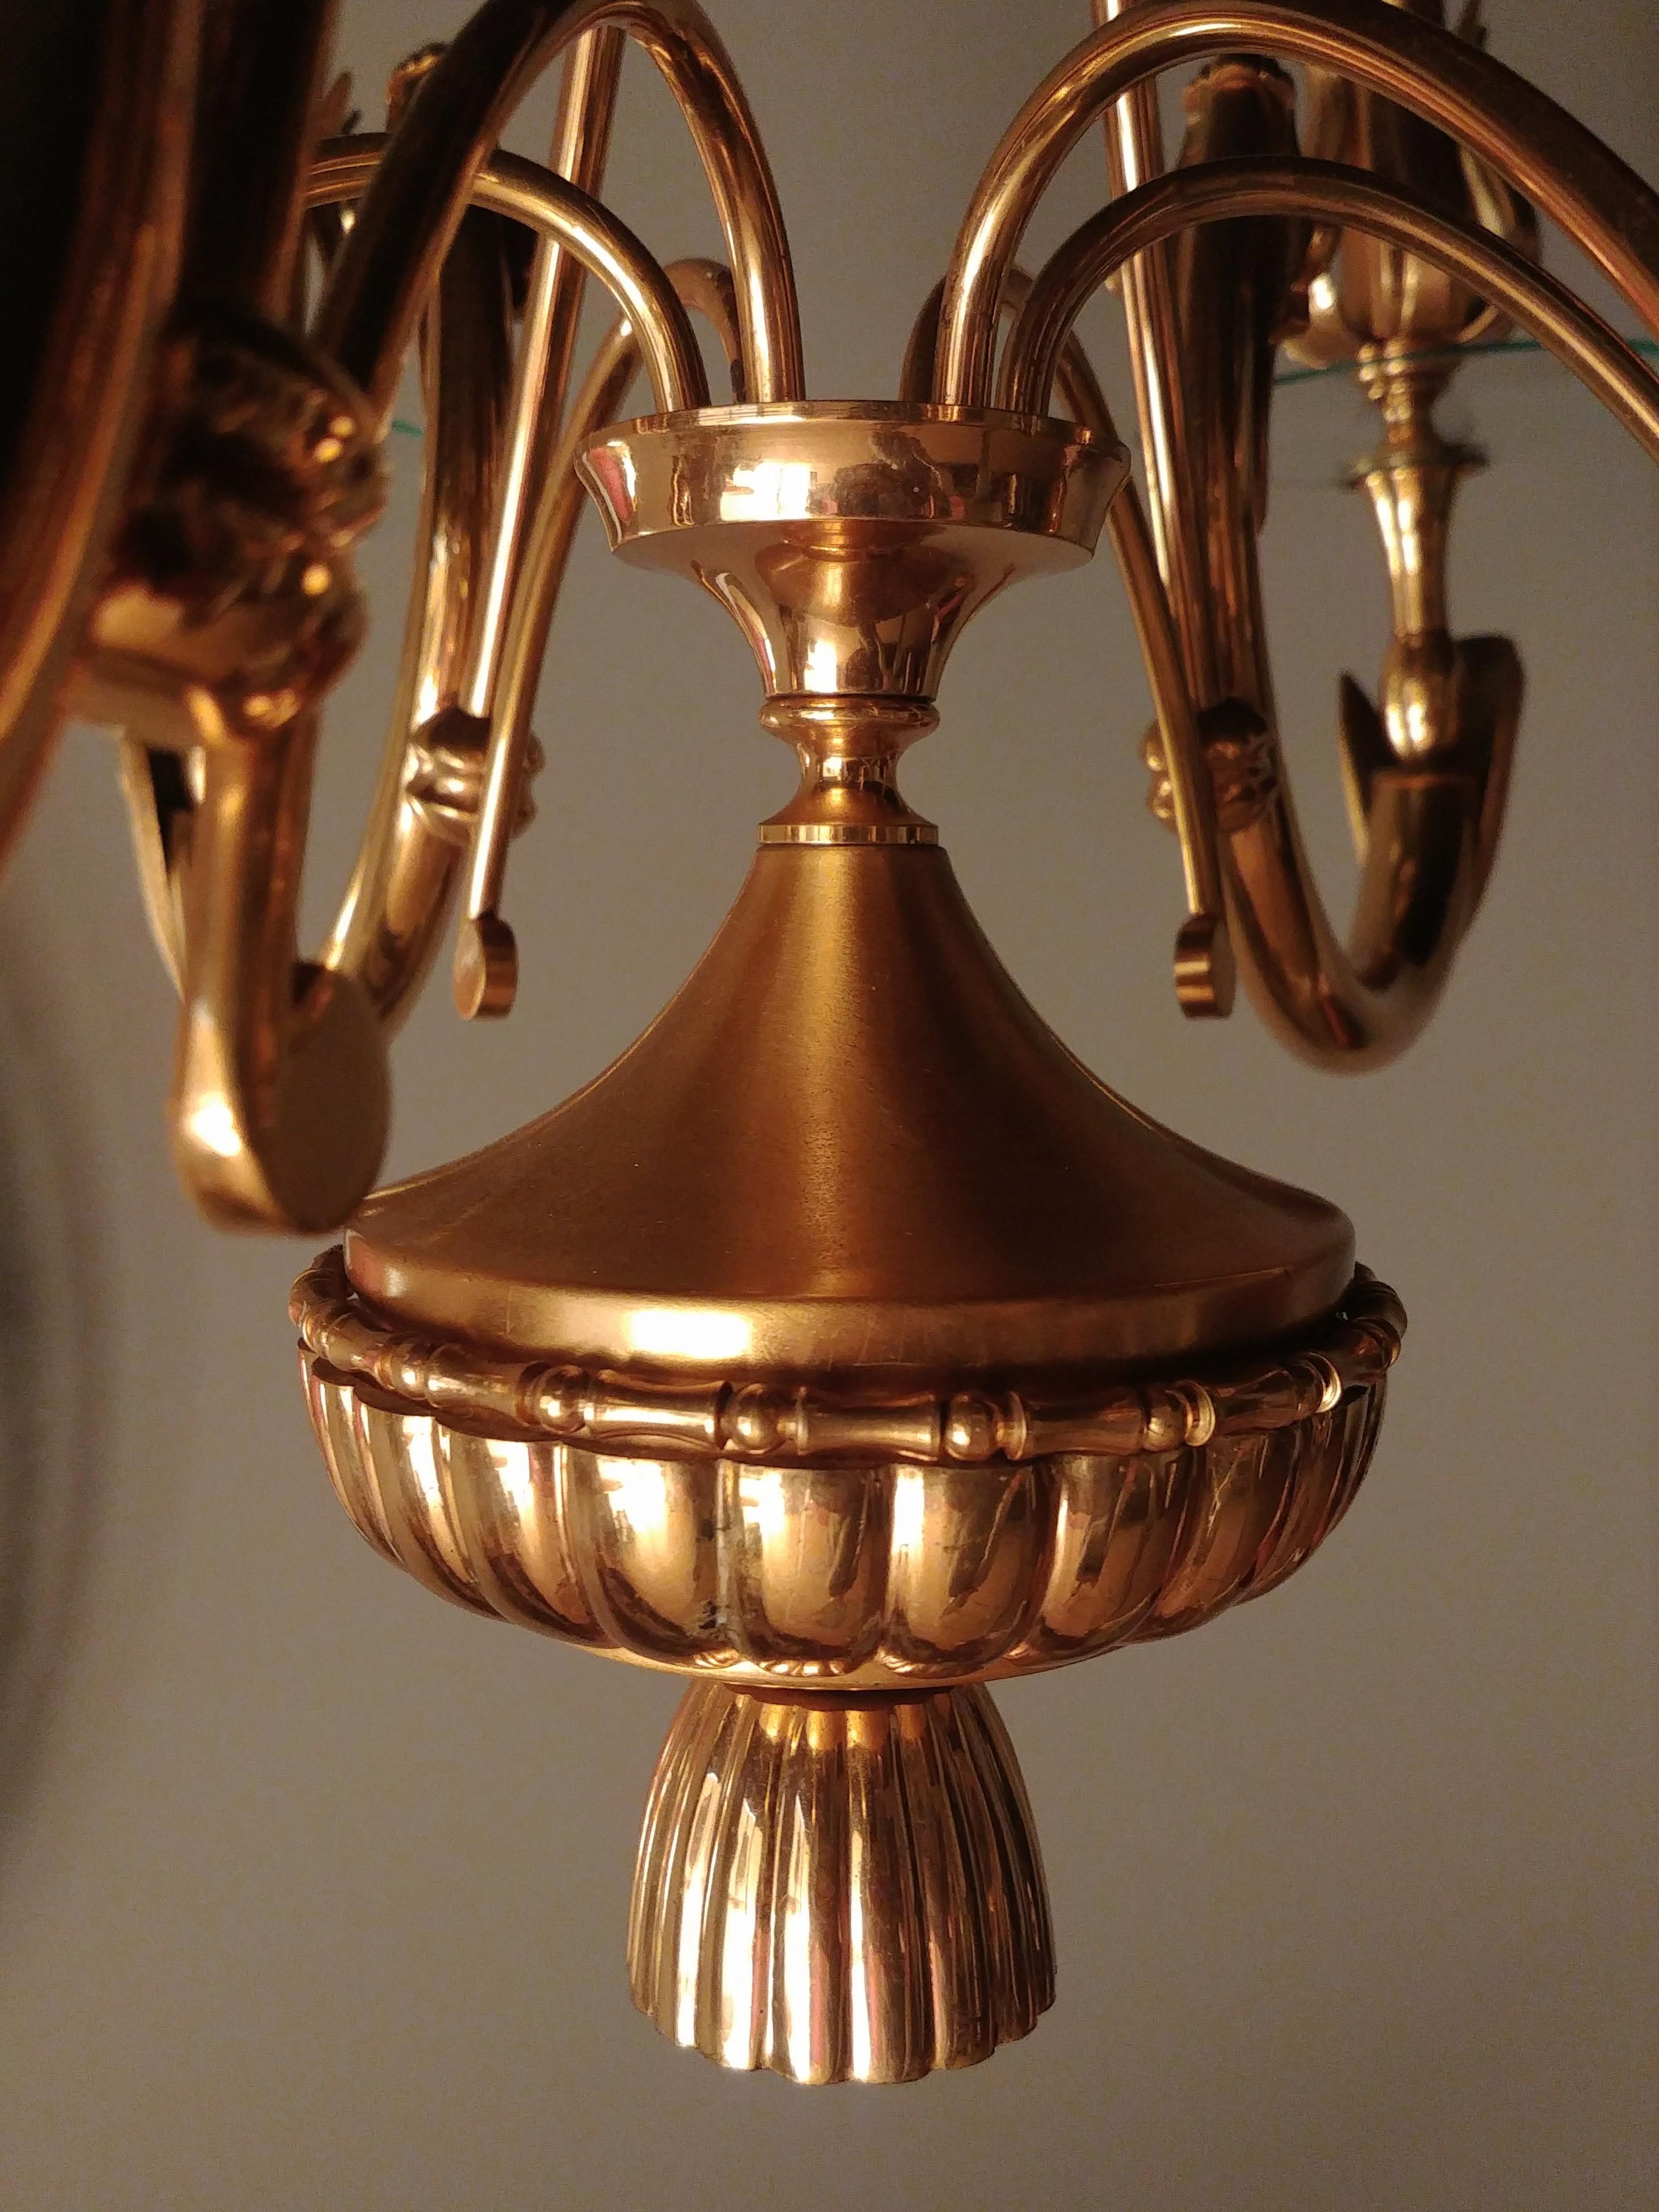 Italian Midcentury Chandelier Brass Glass Attributed to Oscar Torlasco Italy 1960s For Sale